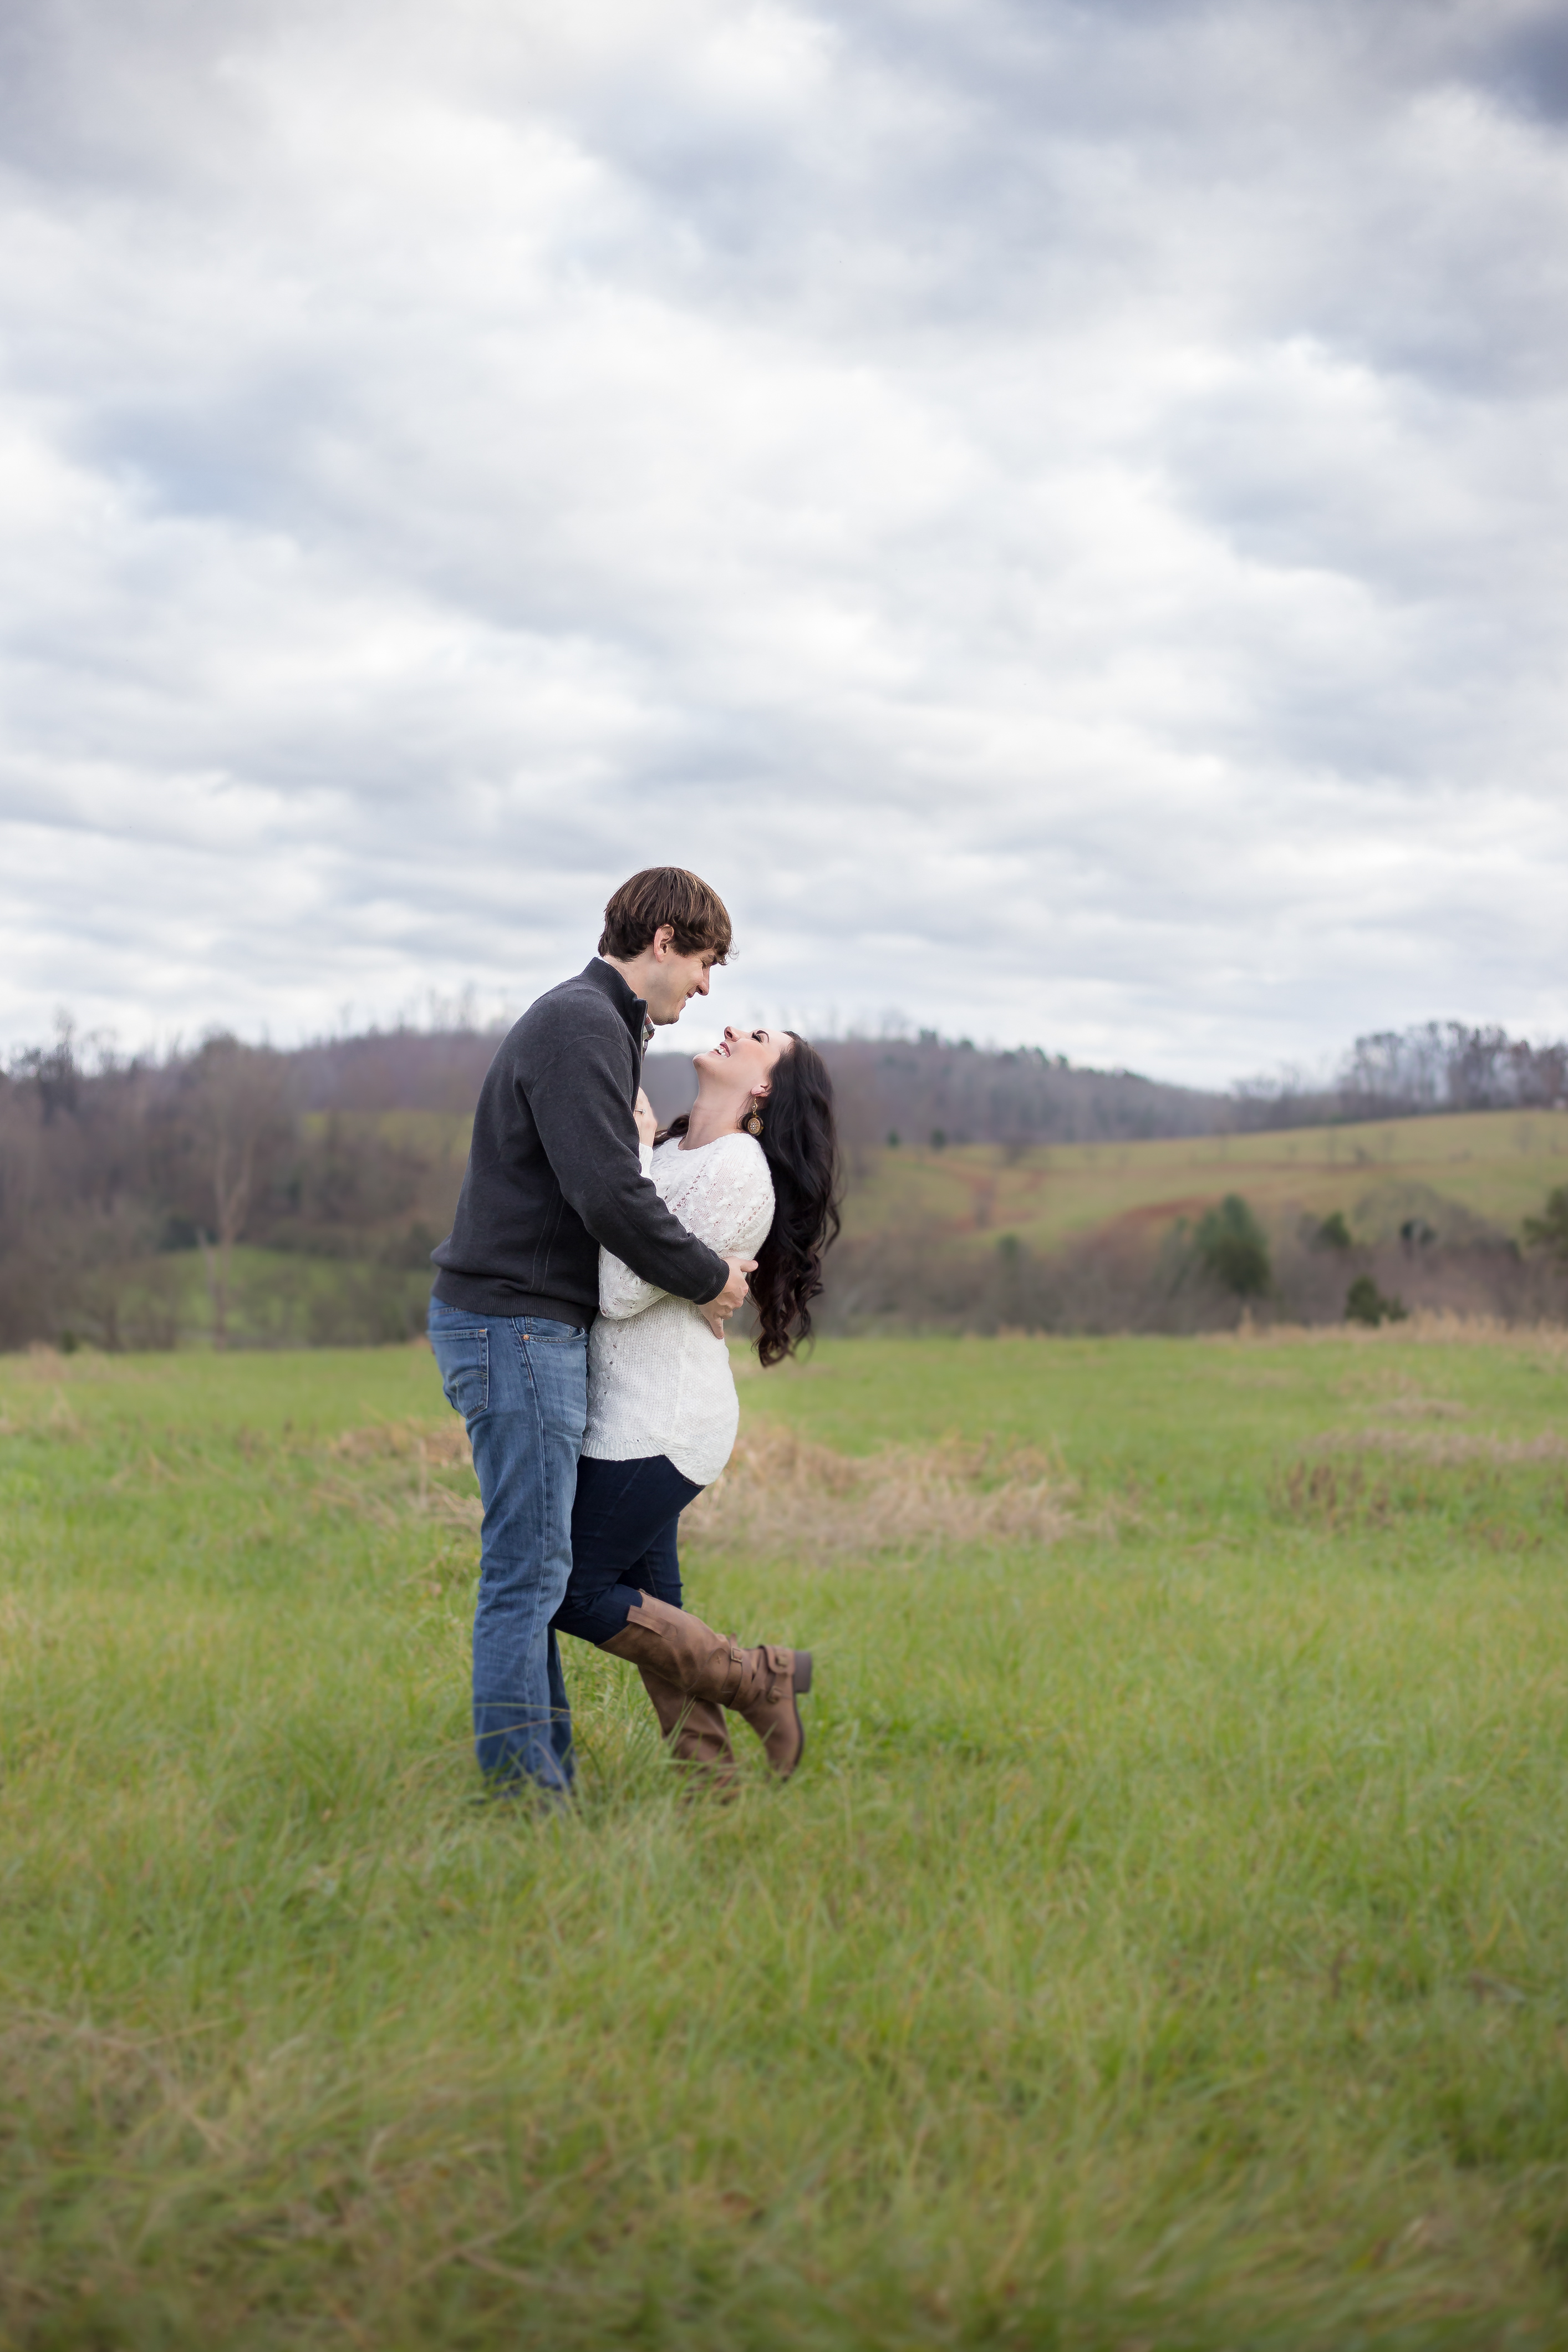 You are currently viewing Rebekah + Drew | Engaged